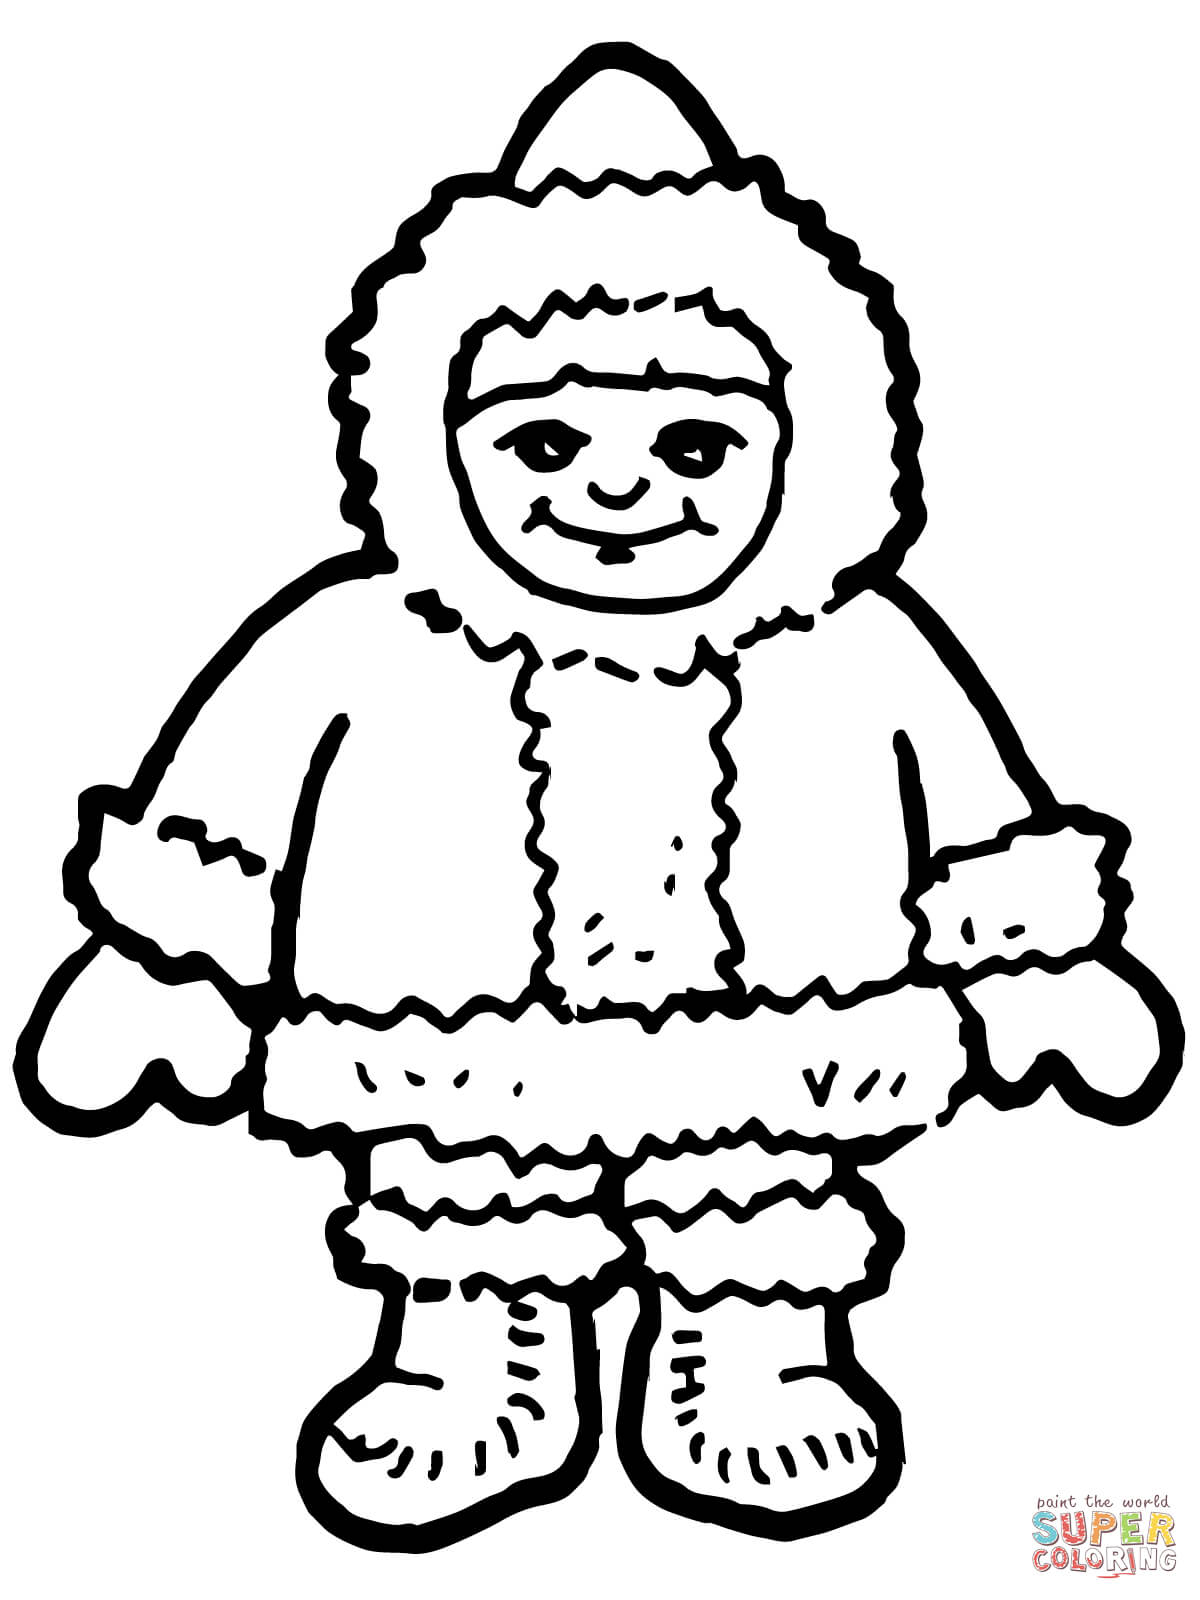 Inuit Coloring Pages Cute Inuit Boy Coloring Page Free Printable Coloring Pages